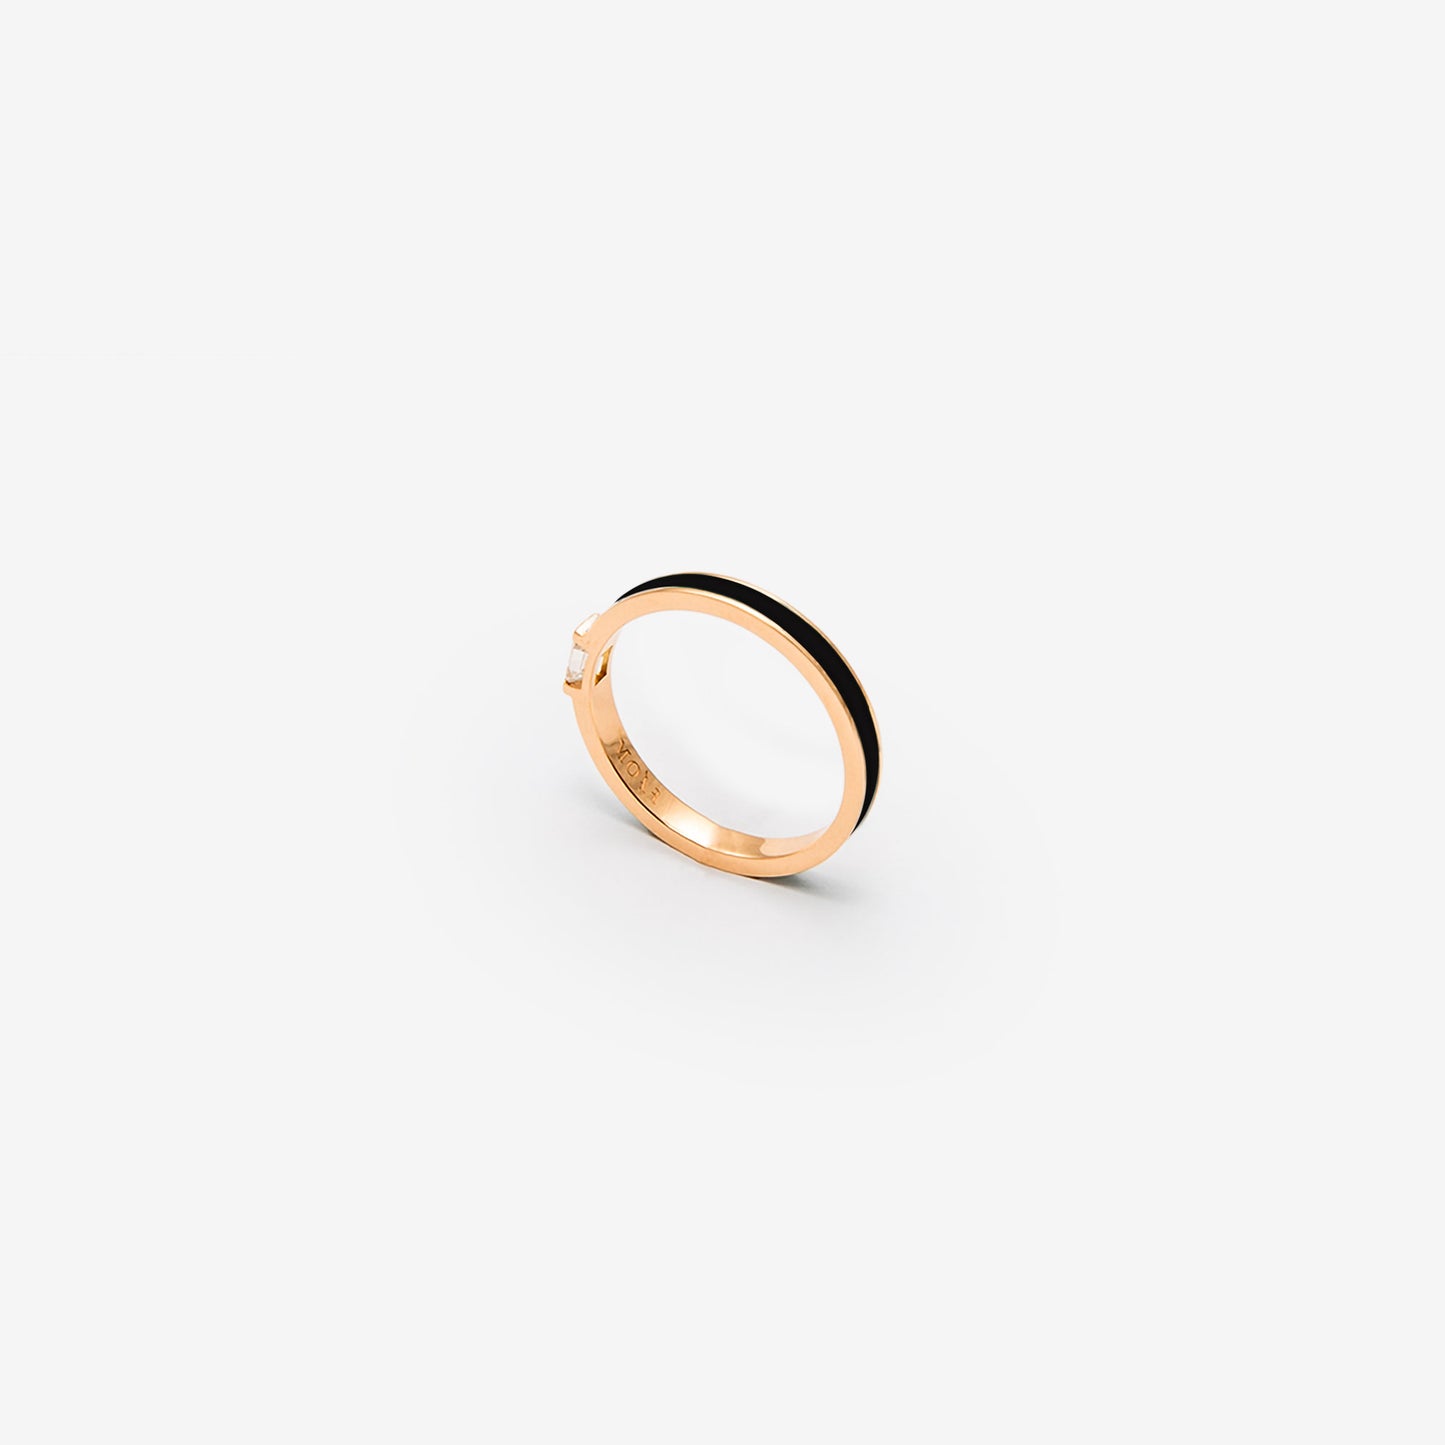 Rose gold band ring  with black enamel and diamond